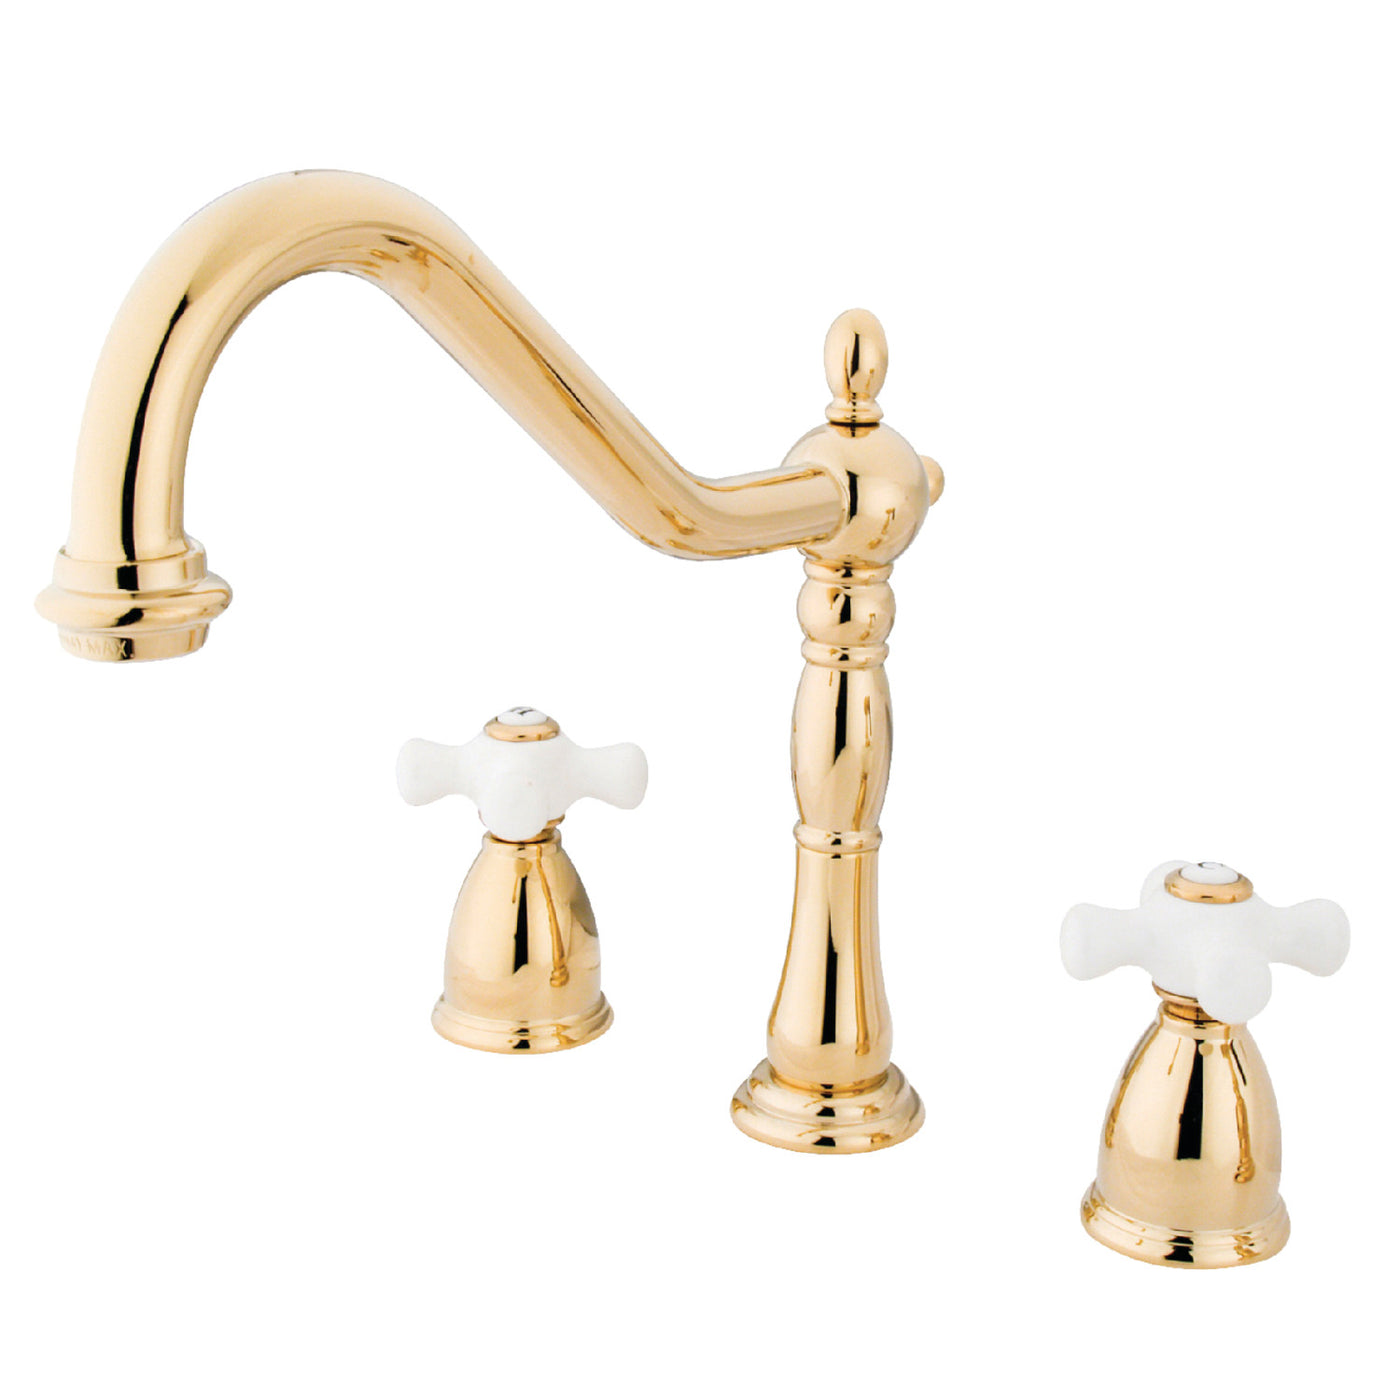 Elements of Design EB1792PXLS Widespread Kitchen Faucet, Polished Brass